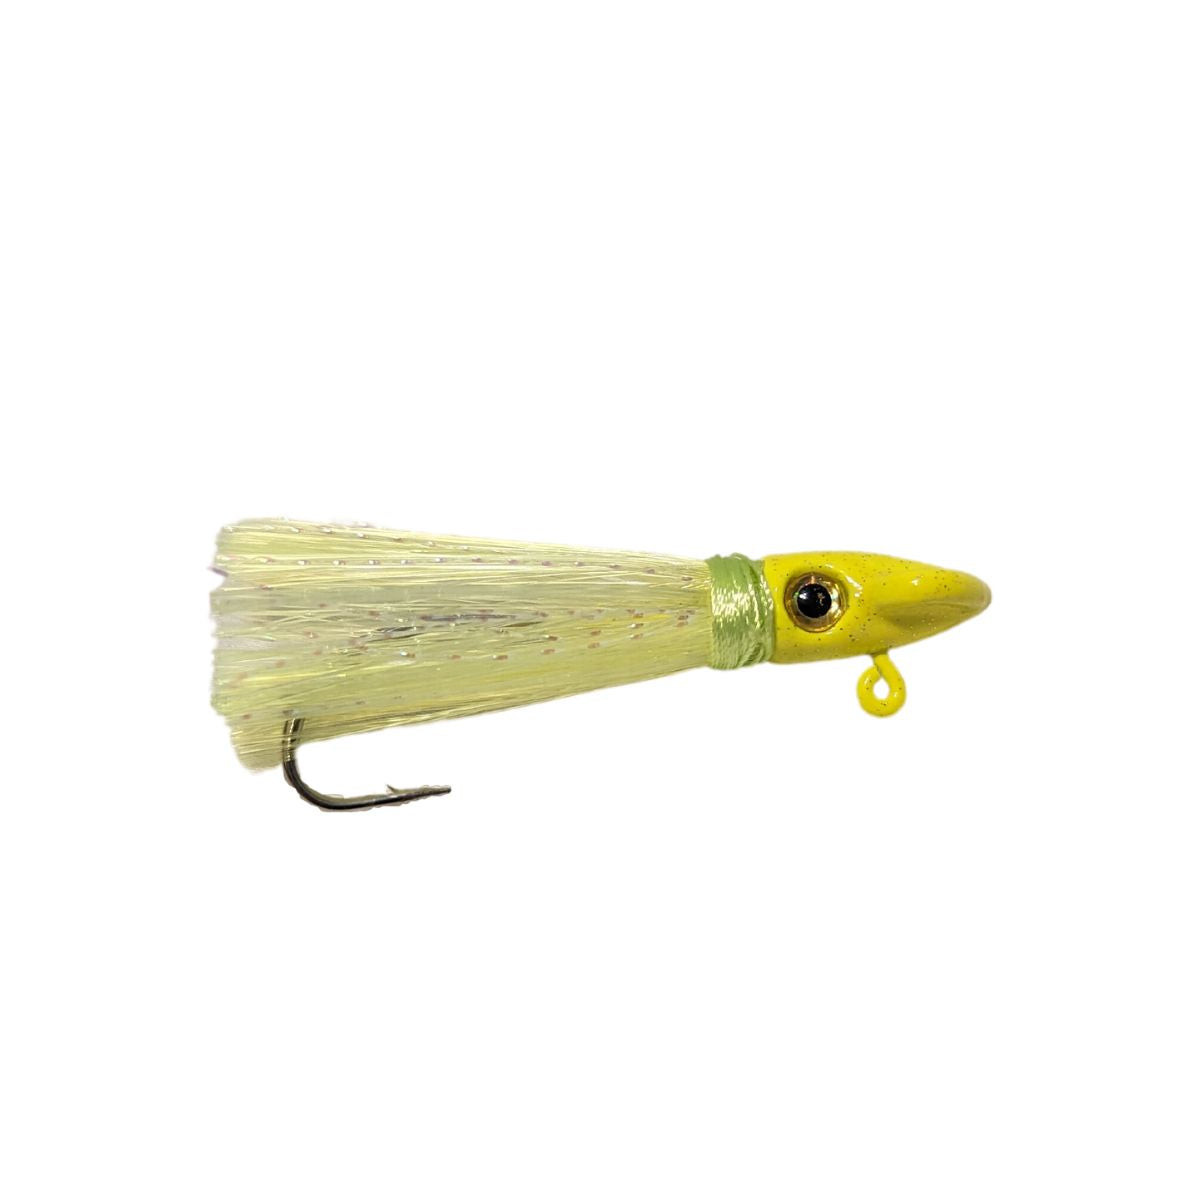 Welcome to Snapper Slappers Fishing Lures – Snapper Slapper Lures